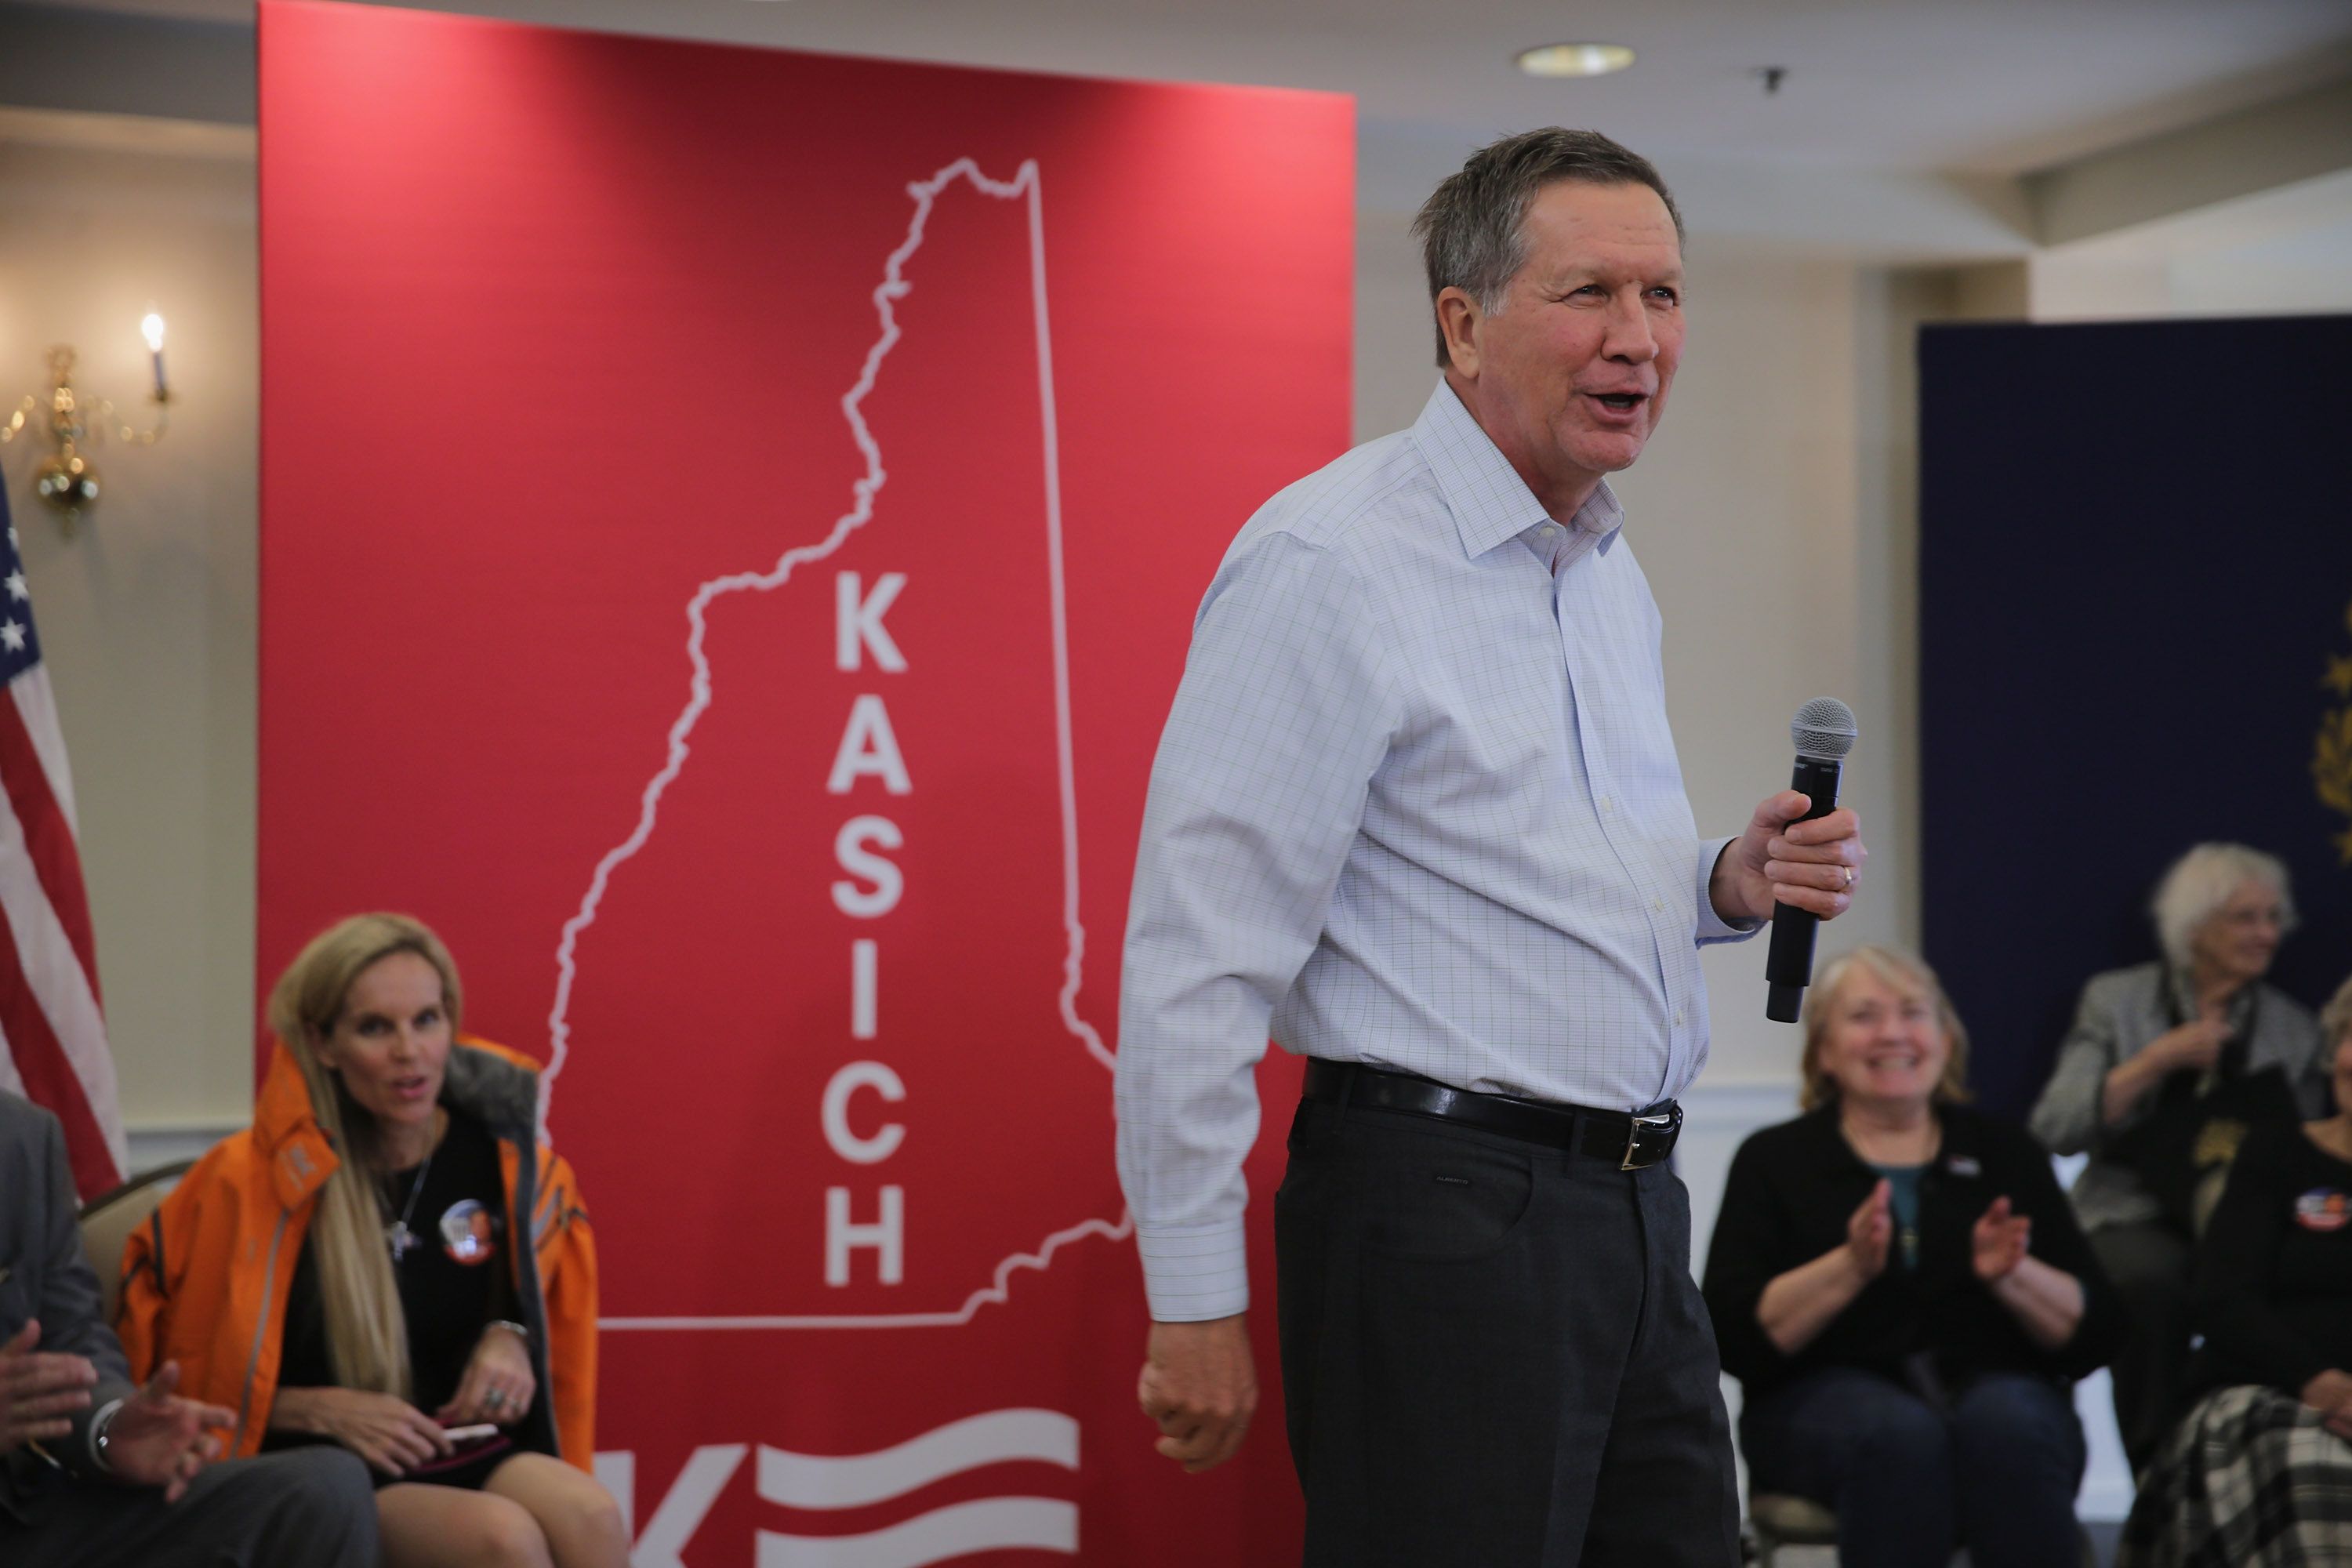 Republican presidential candidate Ohio Gov. John Kasich talks to supporters and undecided voters during a town hall meeting at the Portsmouth Country Club February 1, 2016 in Greenland, New Hampshire. This was Kasich's 87th town hall meeting in New Hampshire, where the country's first primary election will be held Feburary 9. (Chip Somodevilla—Getty Images)